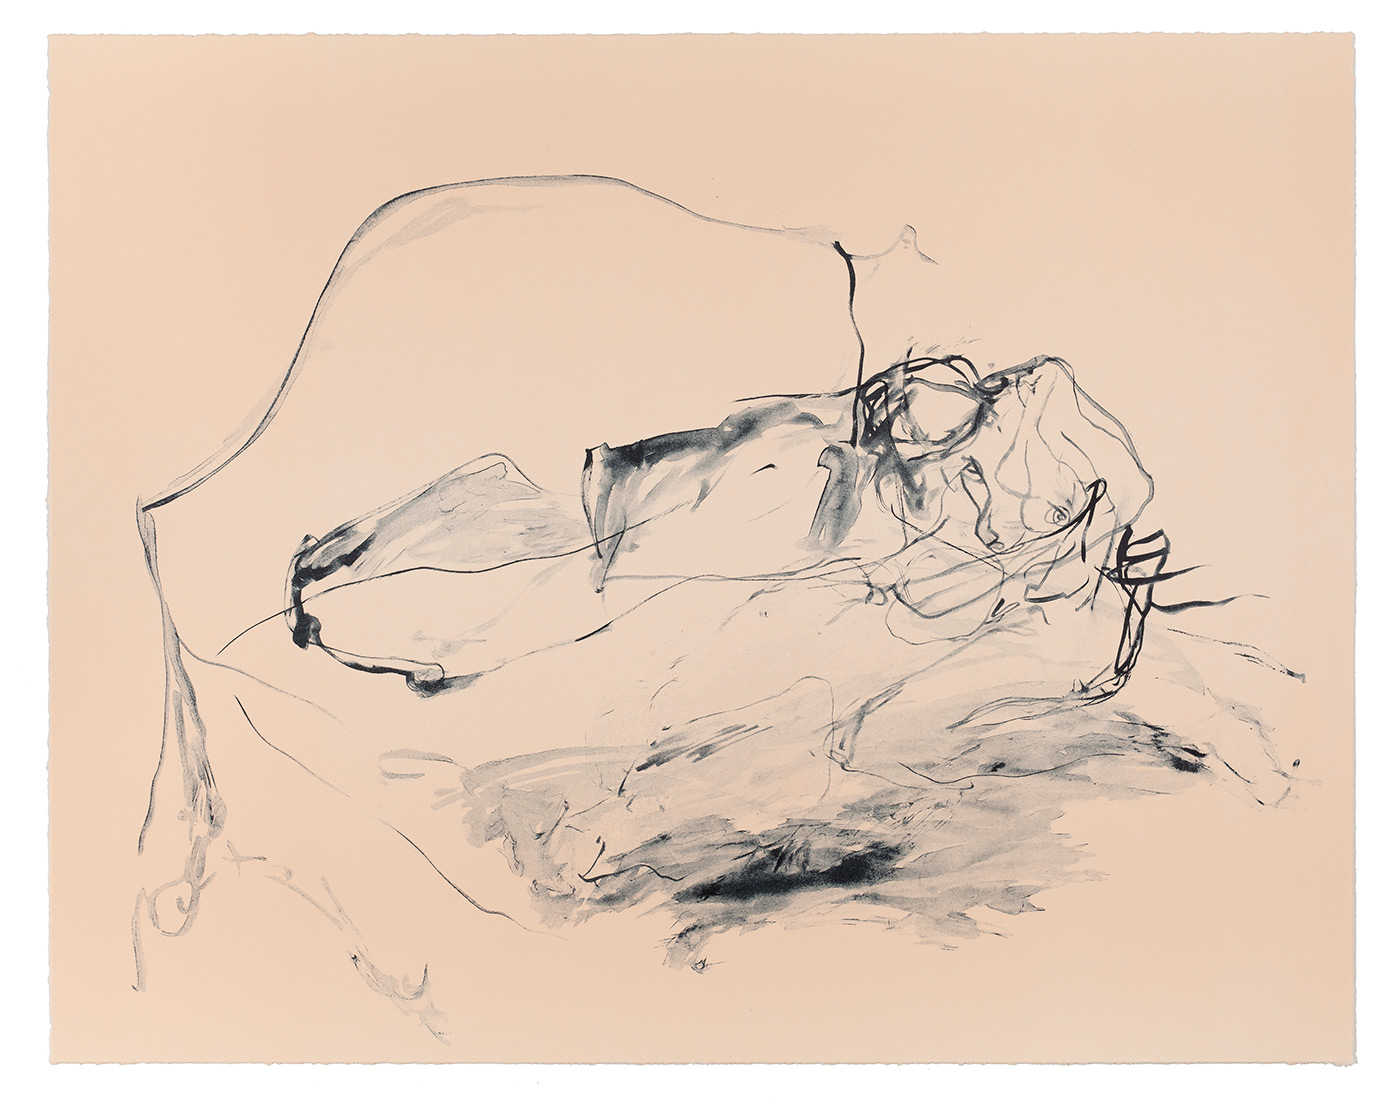 Tracey Emin, On My Knees (2021), Lithograph, Edition of 100